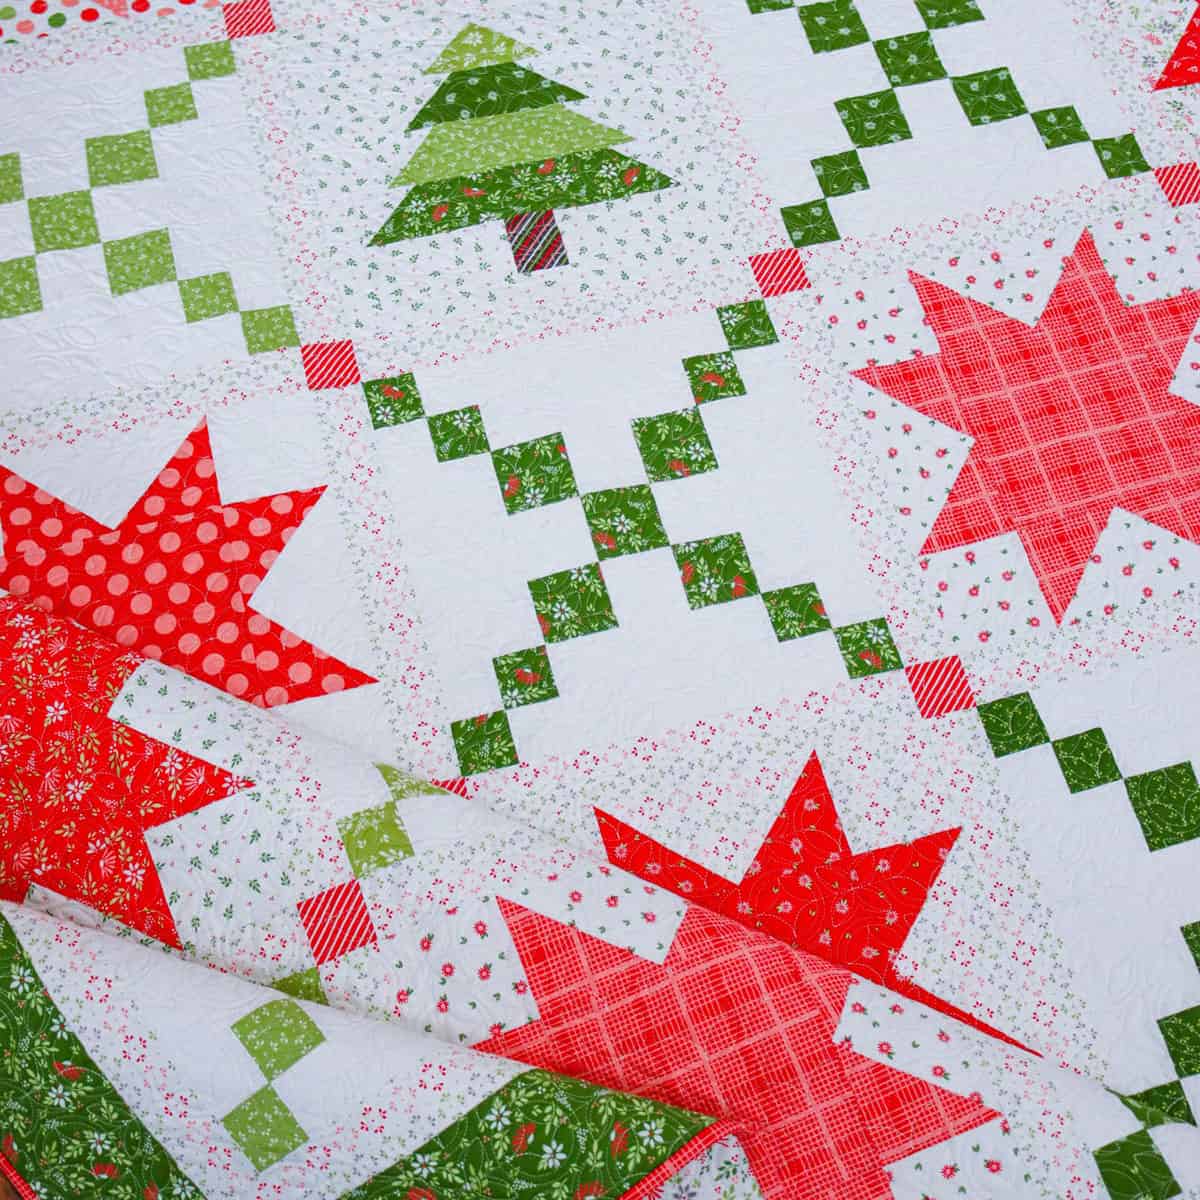 Sugar Pine Stars Fat Quarter Quilt featured by Top US Quilt Blog, A Quilting Life